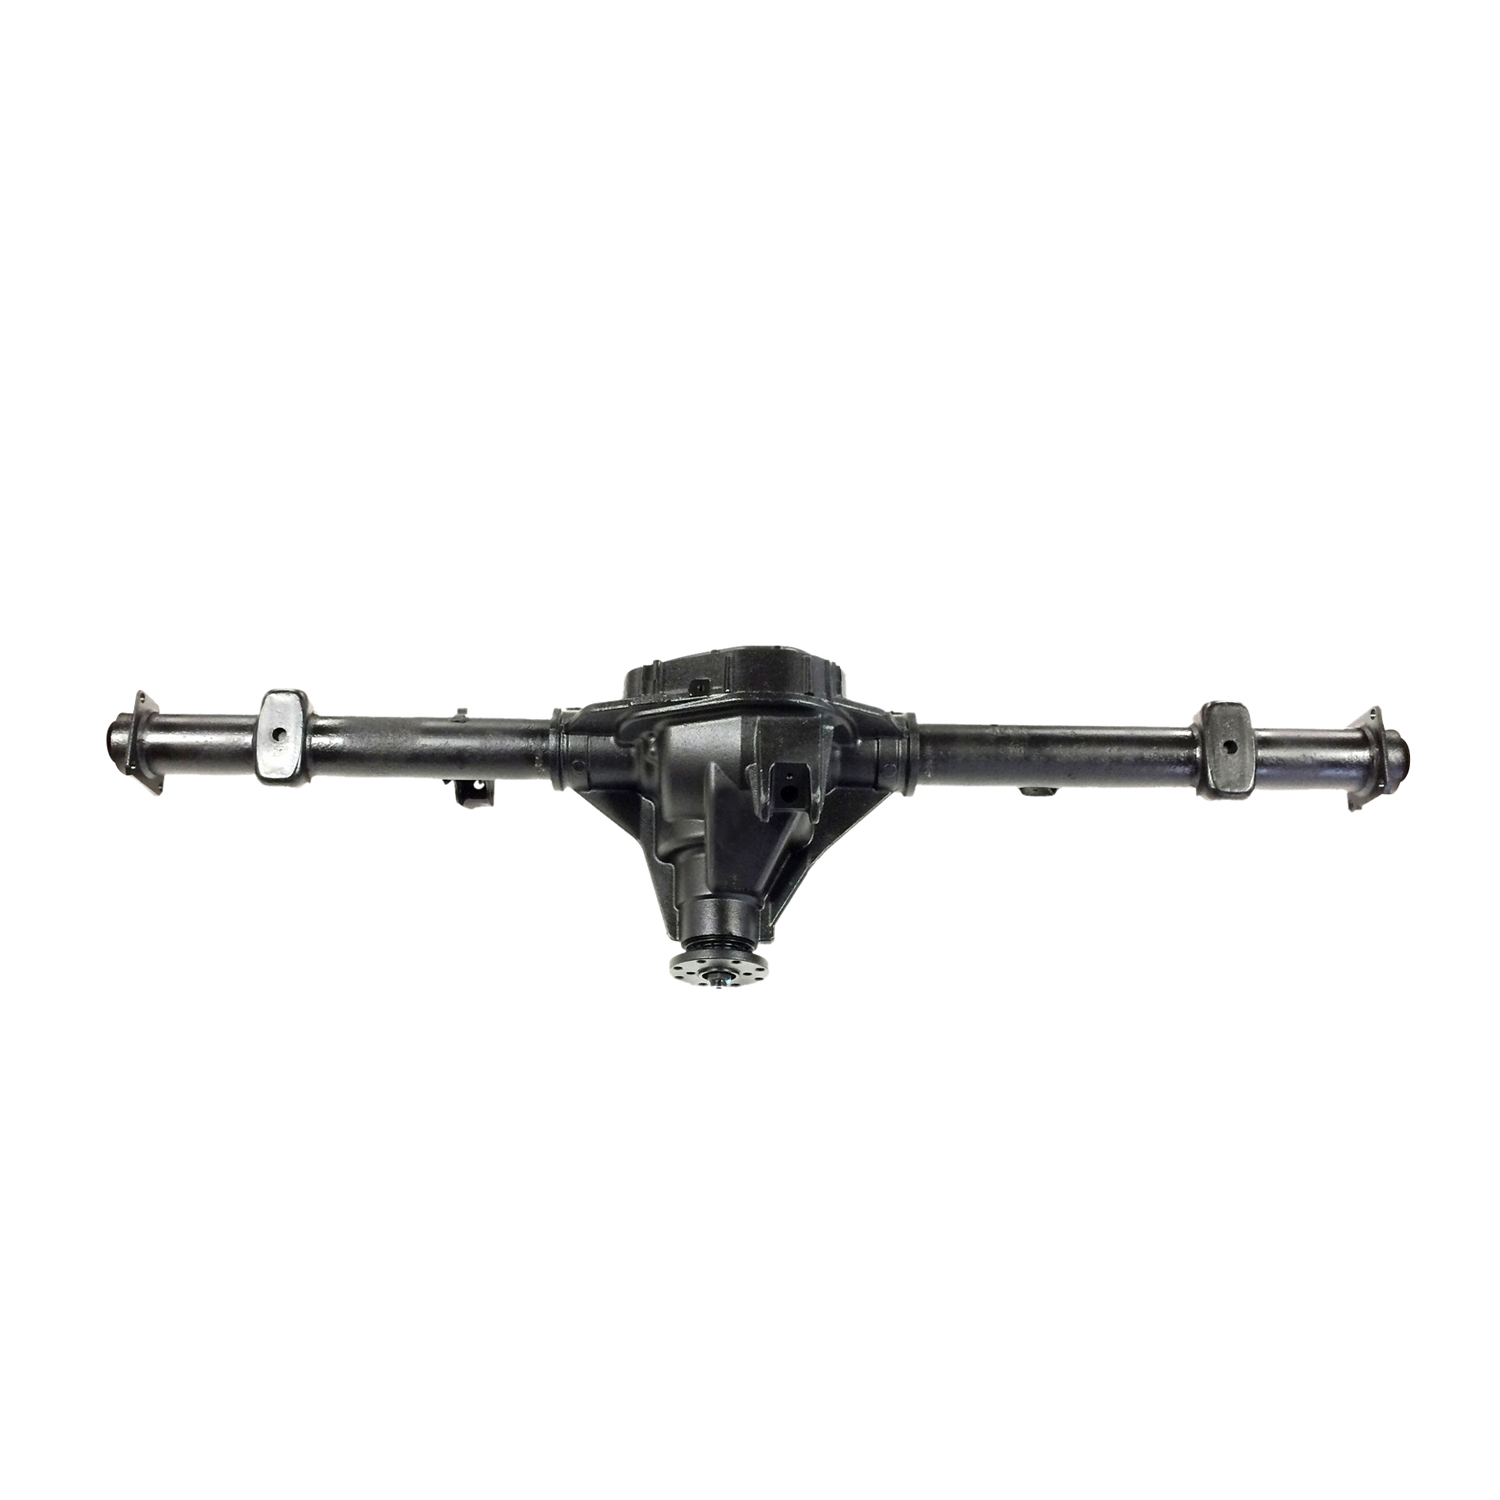 Remanufactured Axle Assy for 9.75" 98-99 F150 3.73 , Rear Drum, Posi LSD *Check Tag*